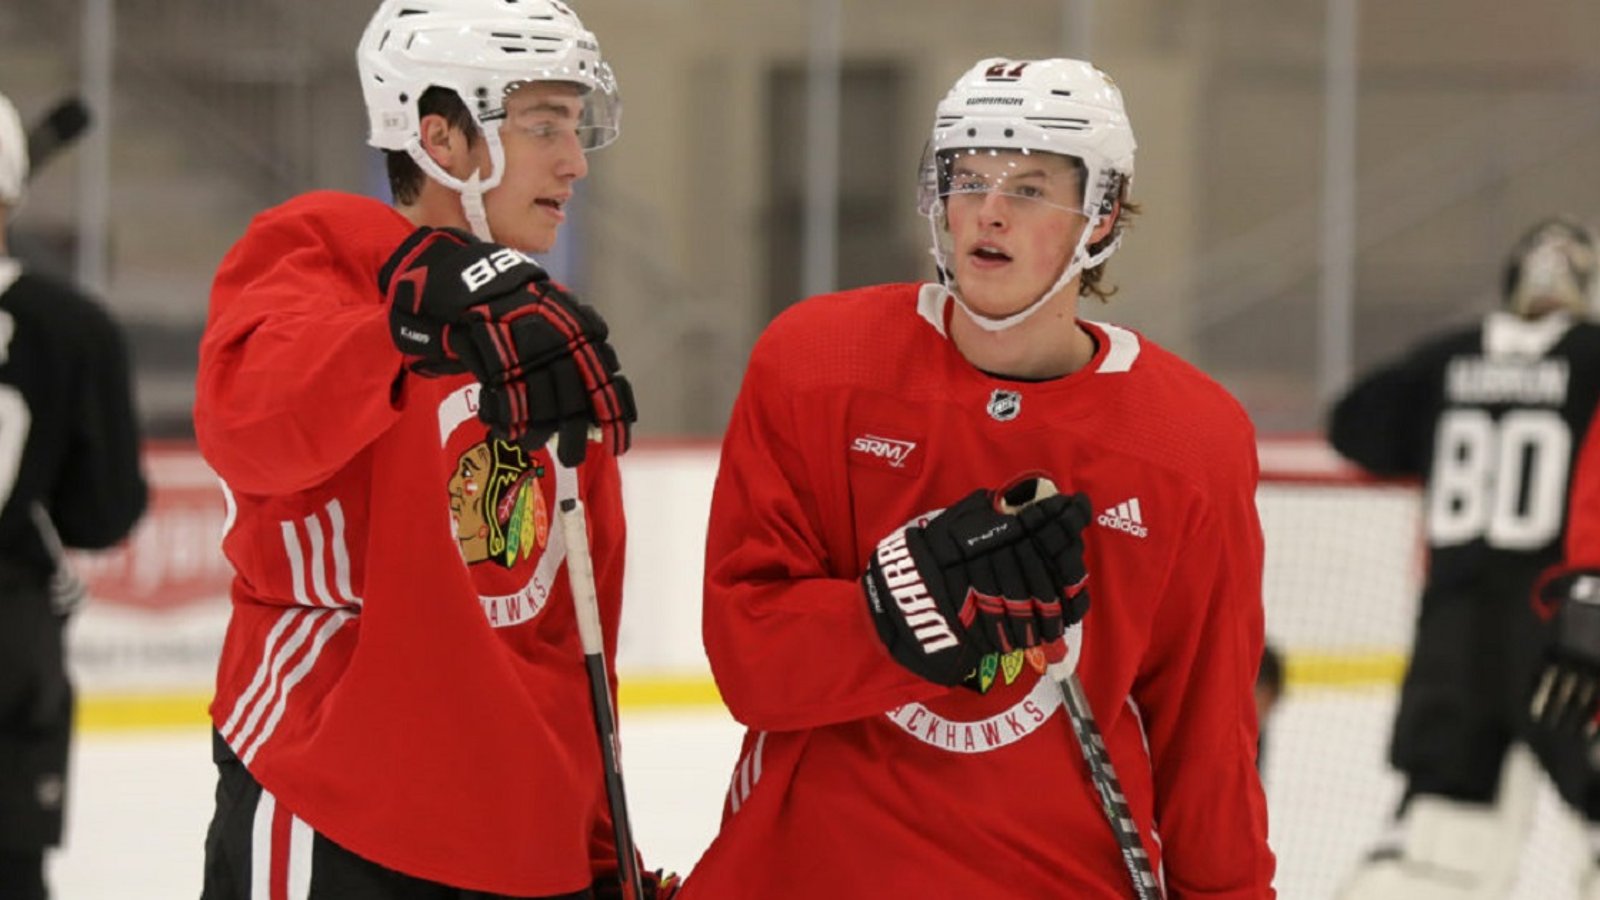 Blackhawks rookie showcase results in an injury on Day 1.